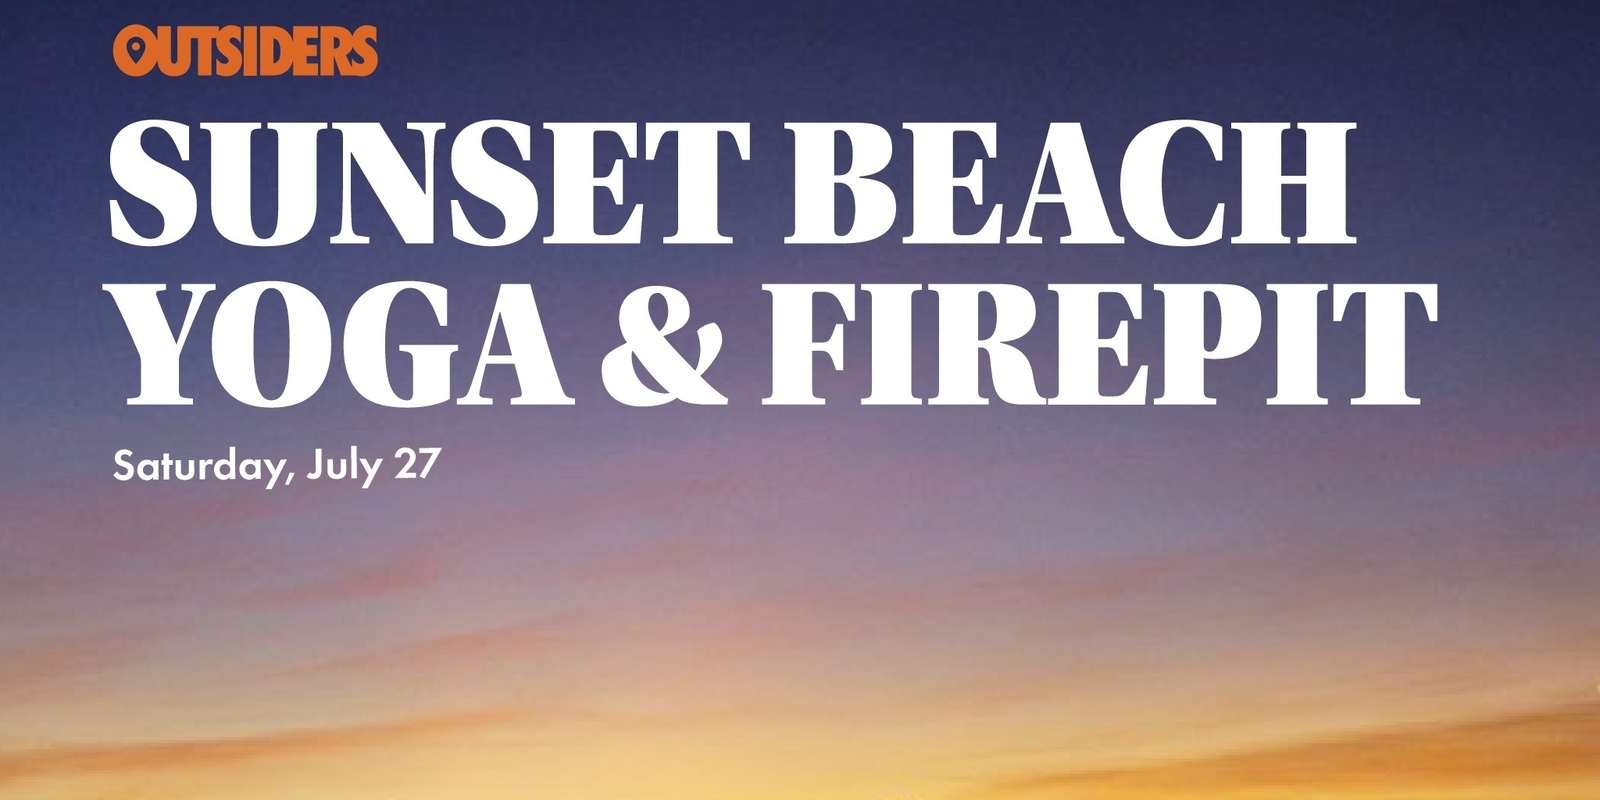 Banner image for Sunset Beach Yoga & Fire Pit